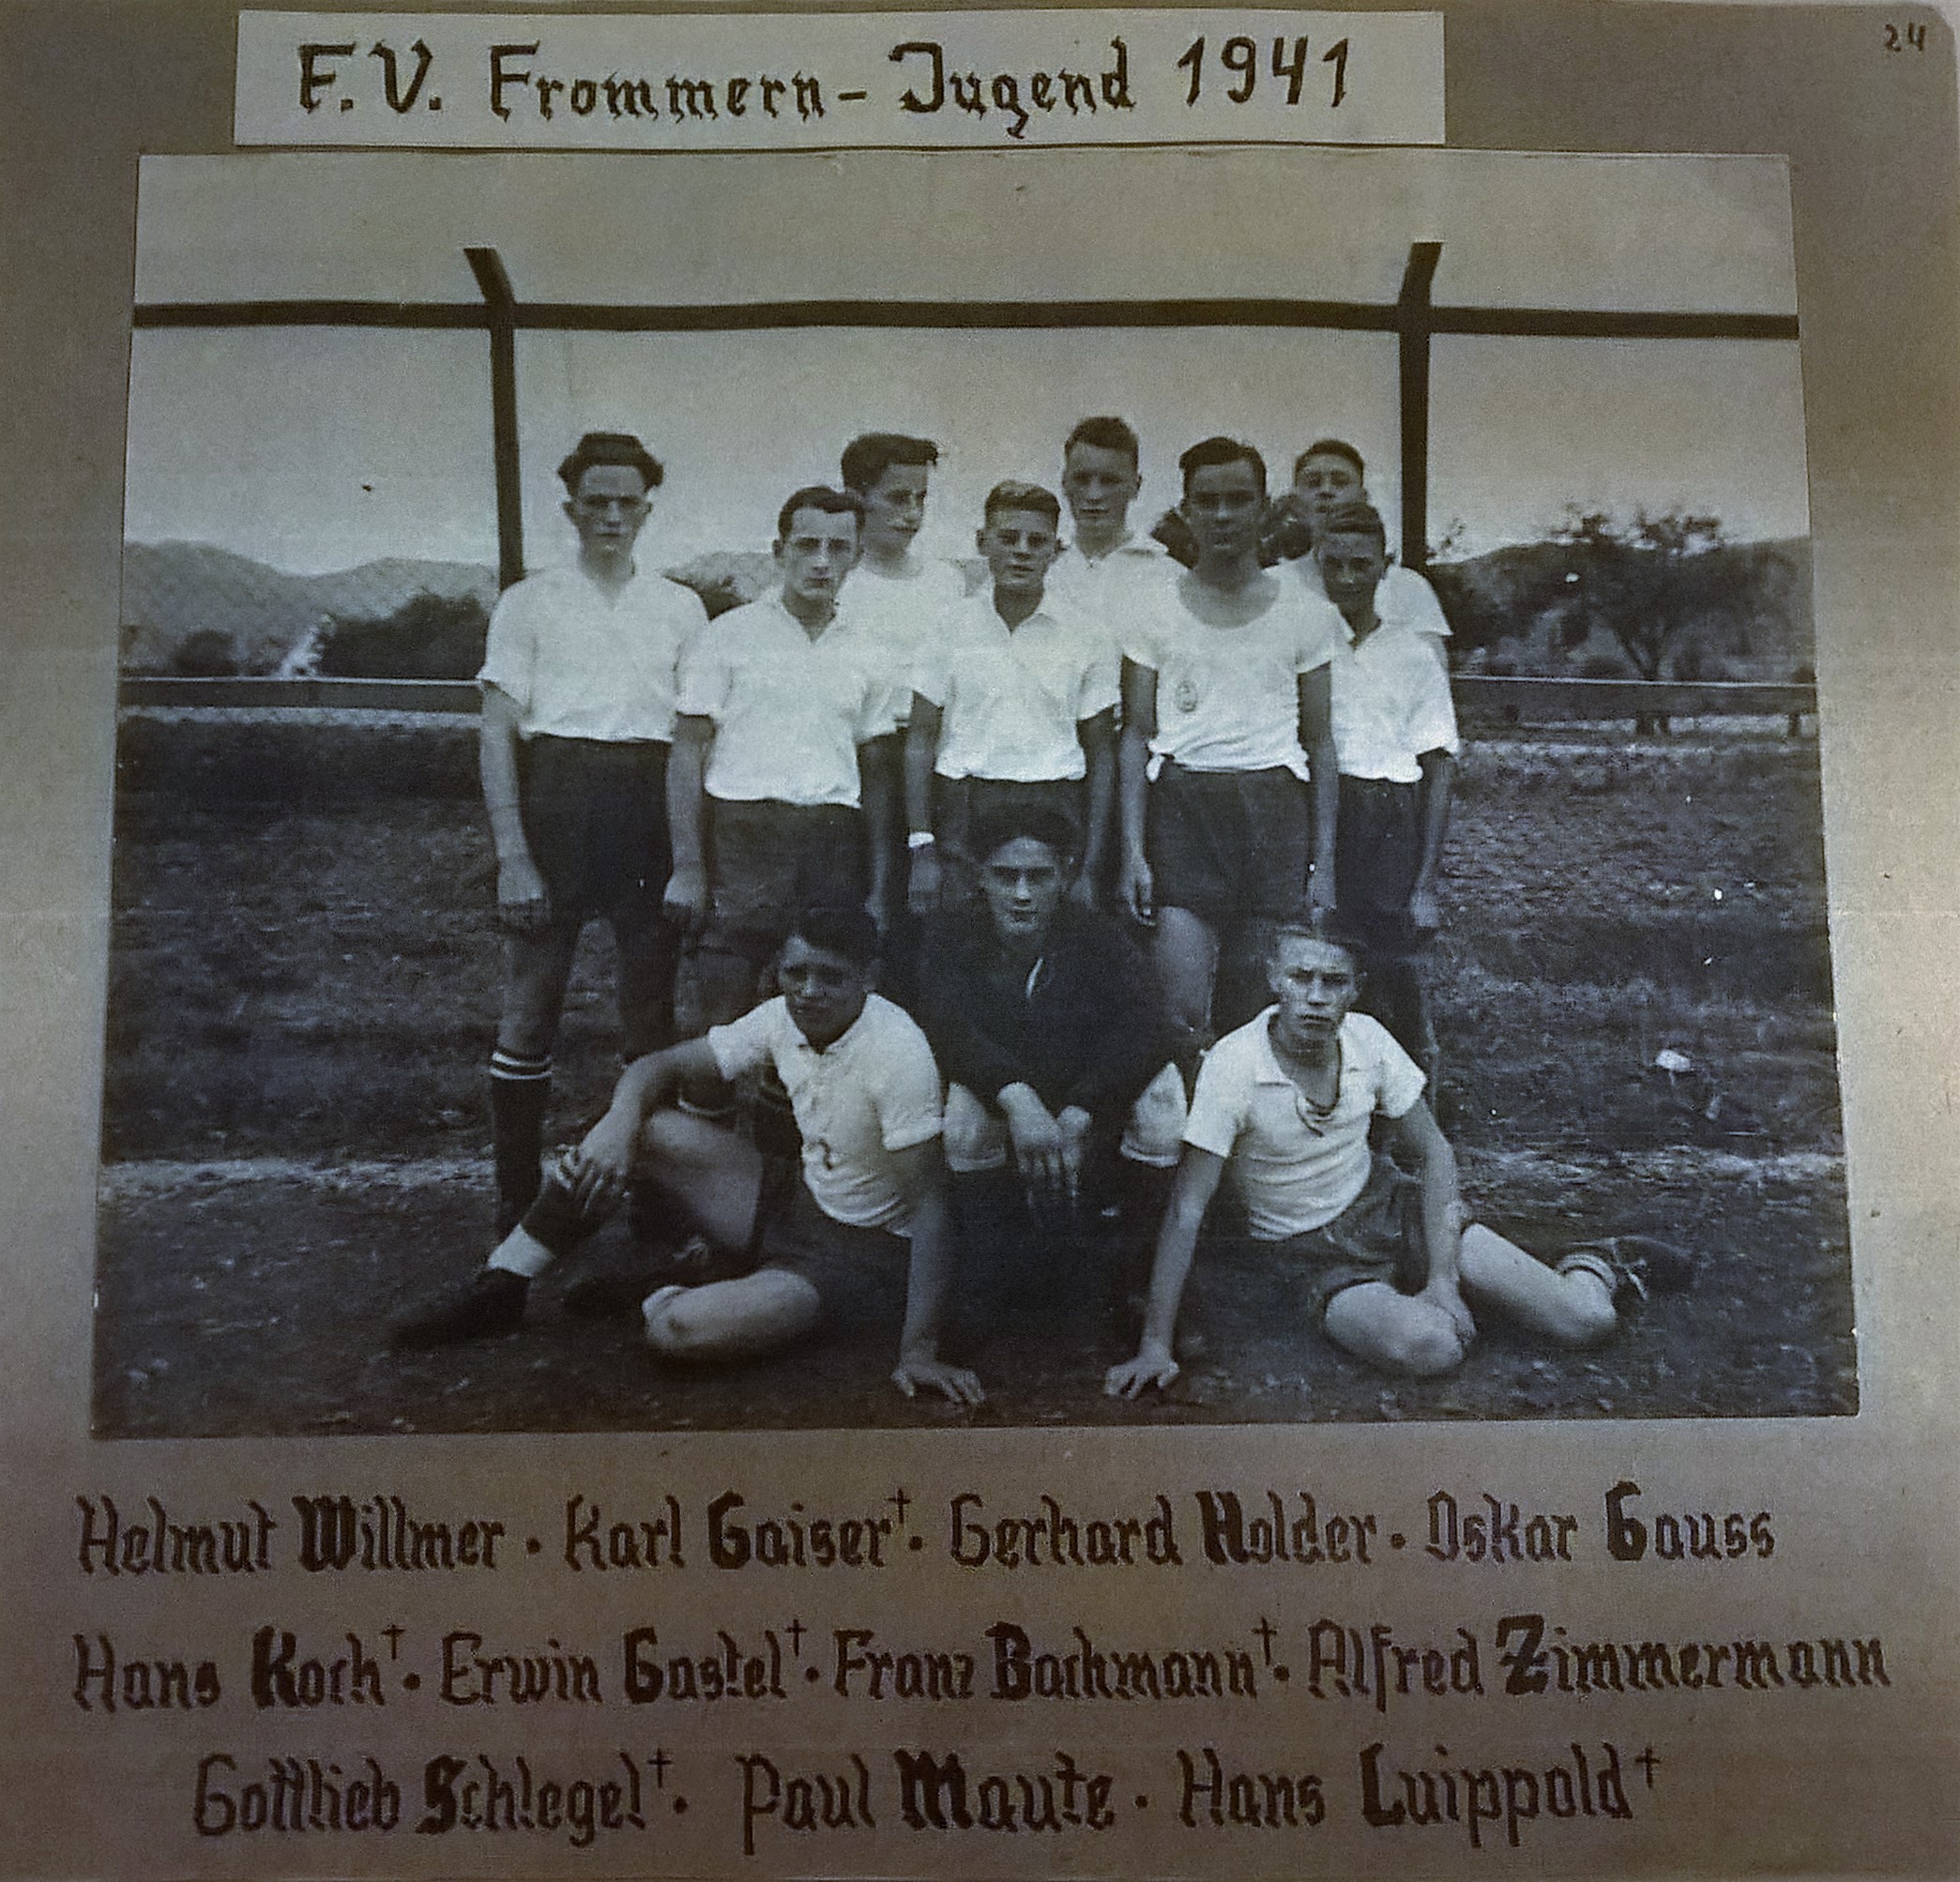 TSV Frommern Jugend 1941